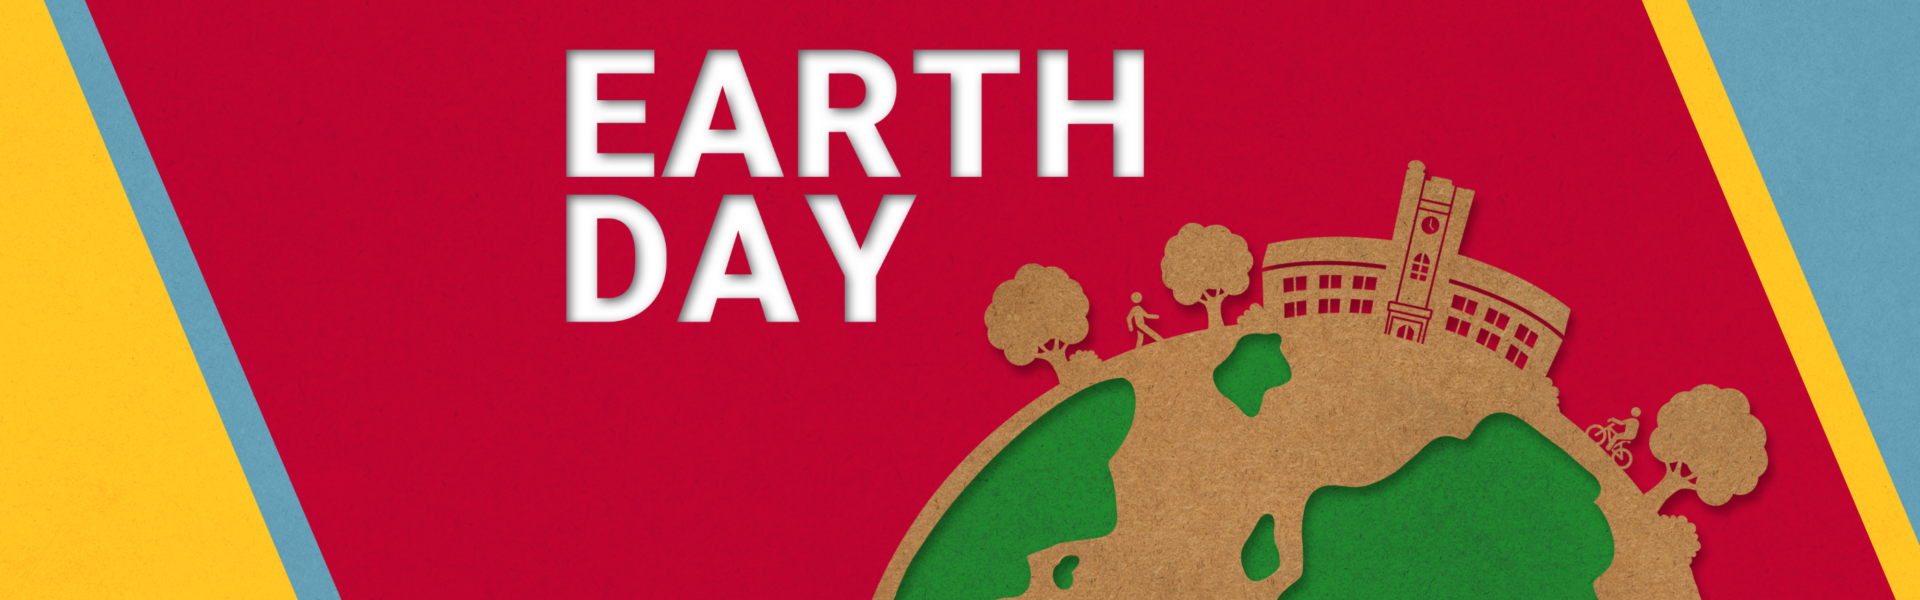 Earth Day. A cork graphic of the earth.